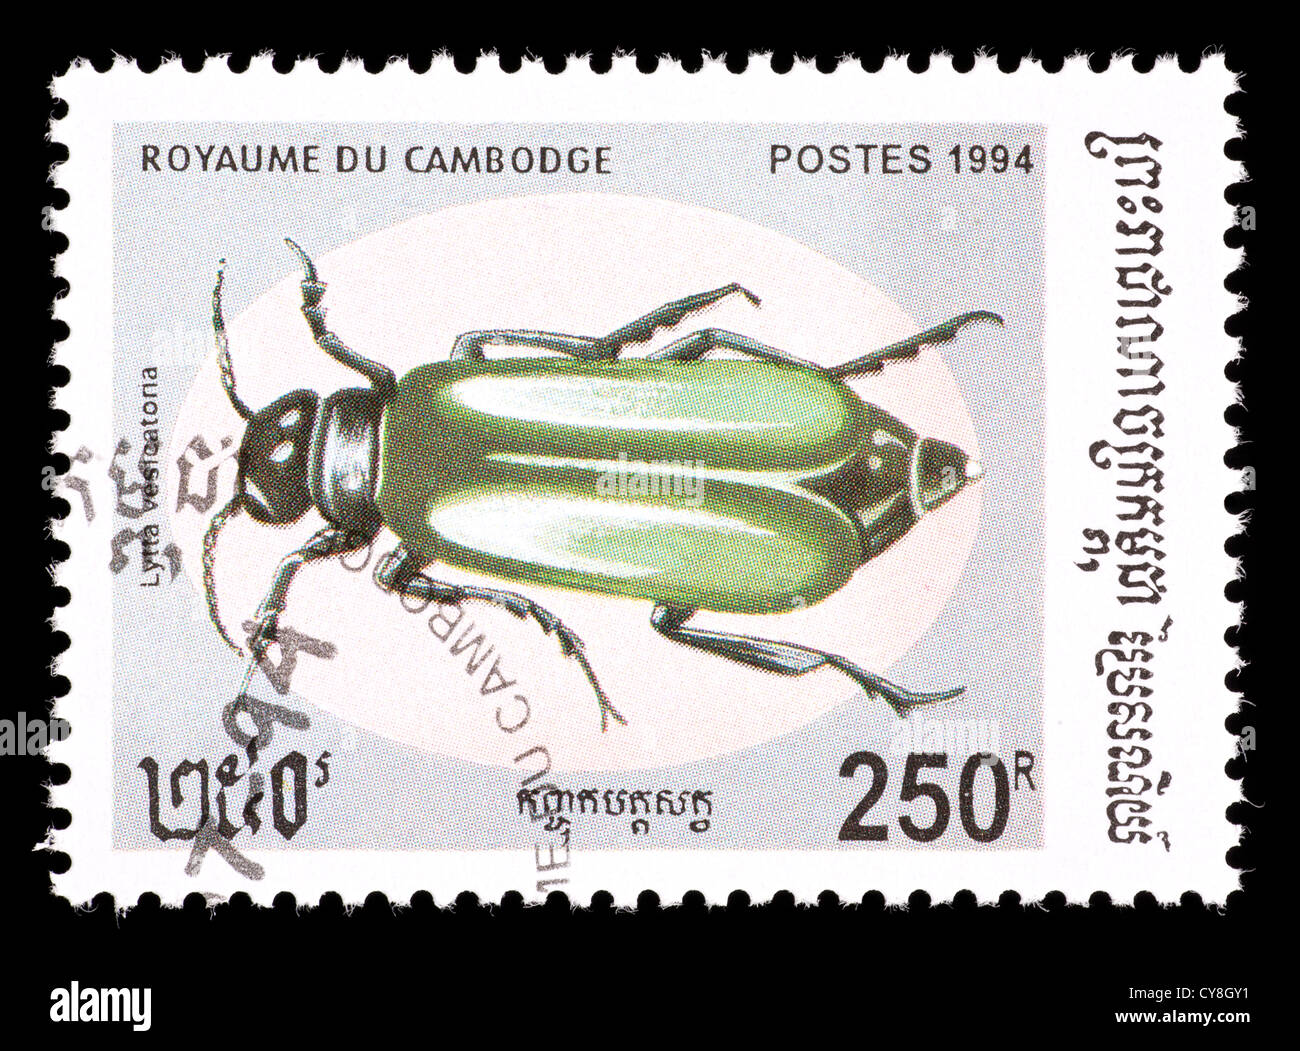 Postage stamp from Cambodia depicting a blister beetle (Lytta vesicatoria) Stock Photo